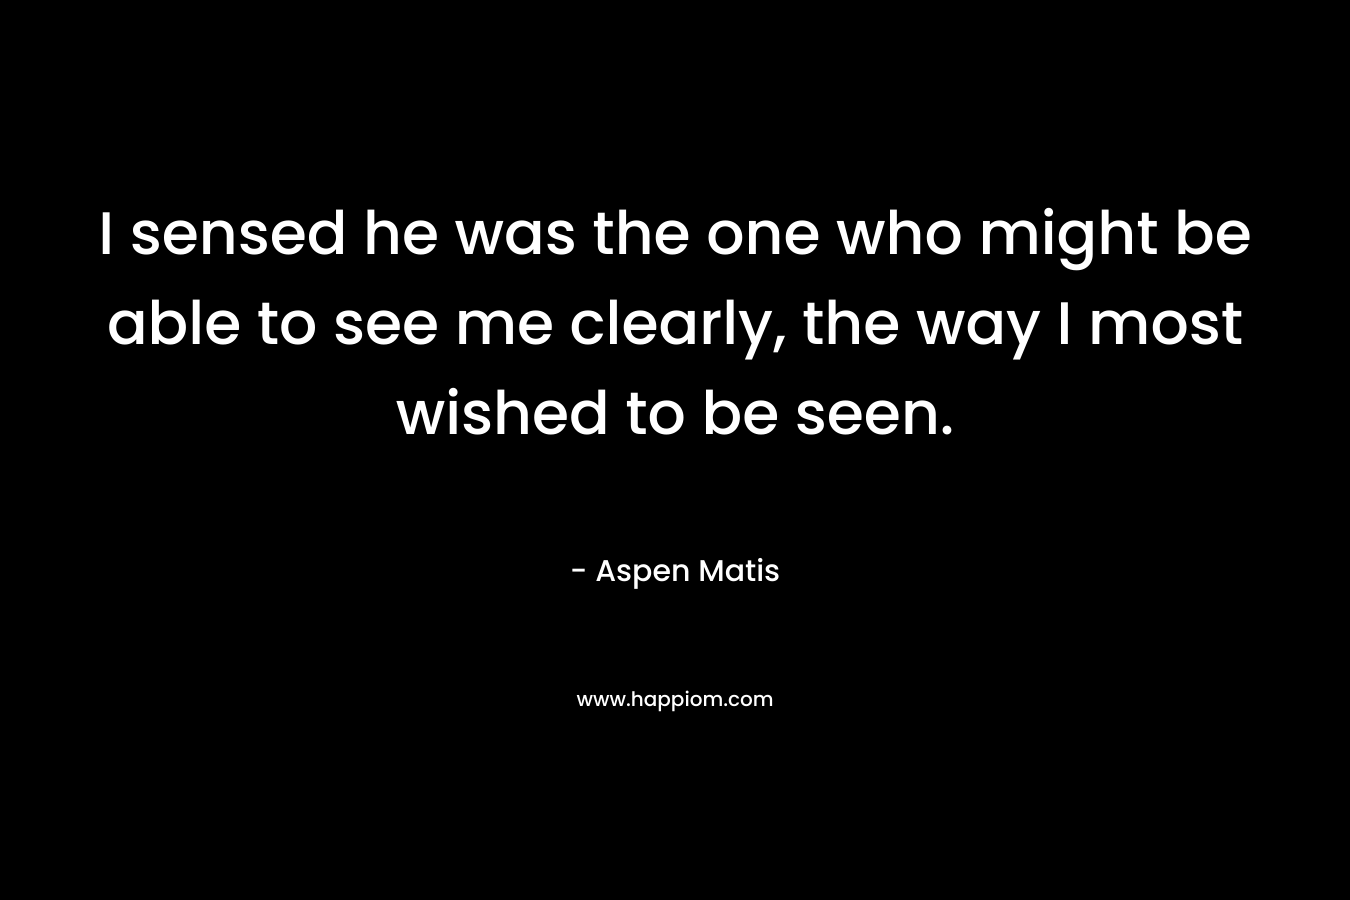 I sensed he was the one who might be able to see me clearly, the way I most wished to be seen. – Aspen Matis